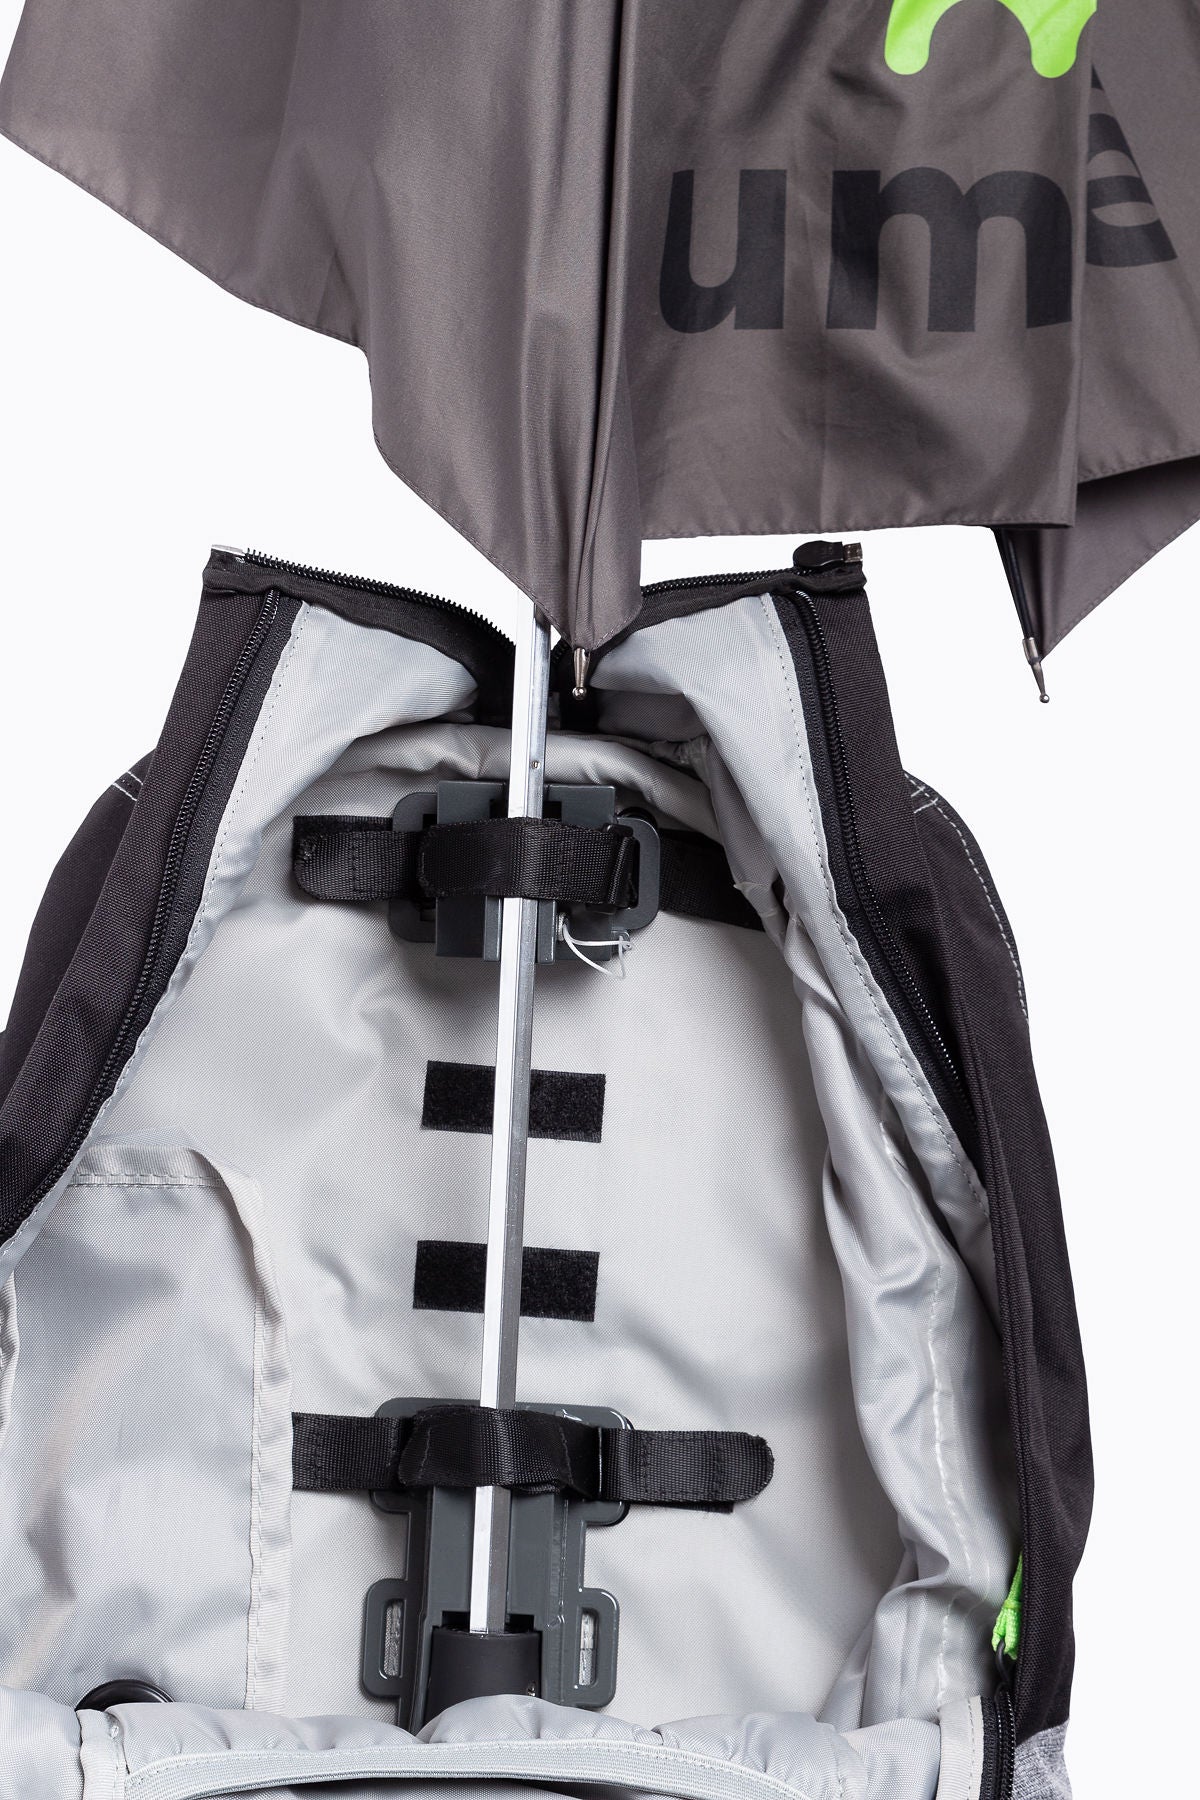 Umbre Excursion Backpack product image, grey with black and green highlights , showing internal bracket that umbrella attaches too.